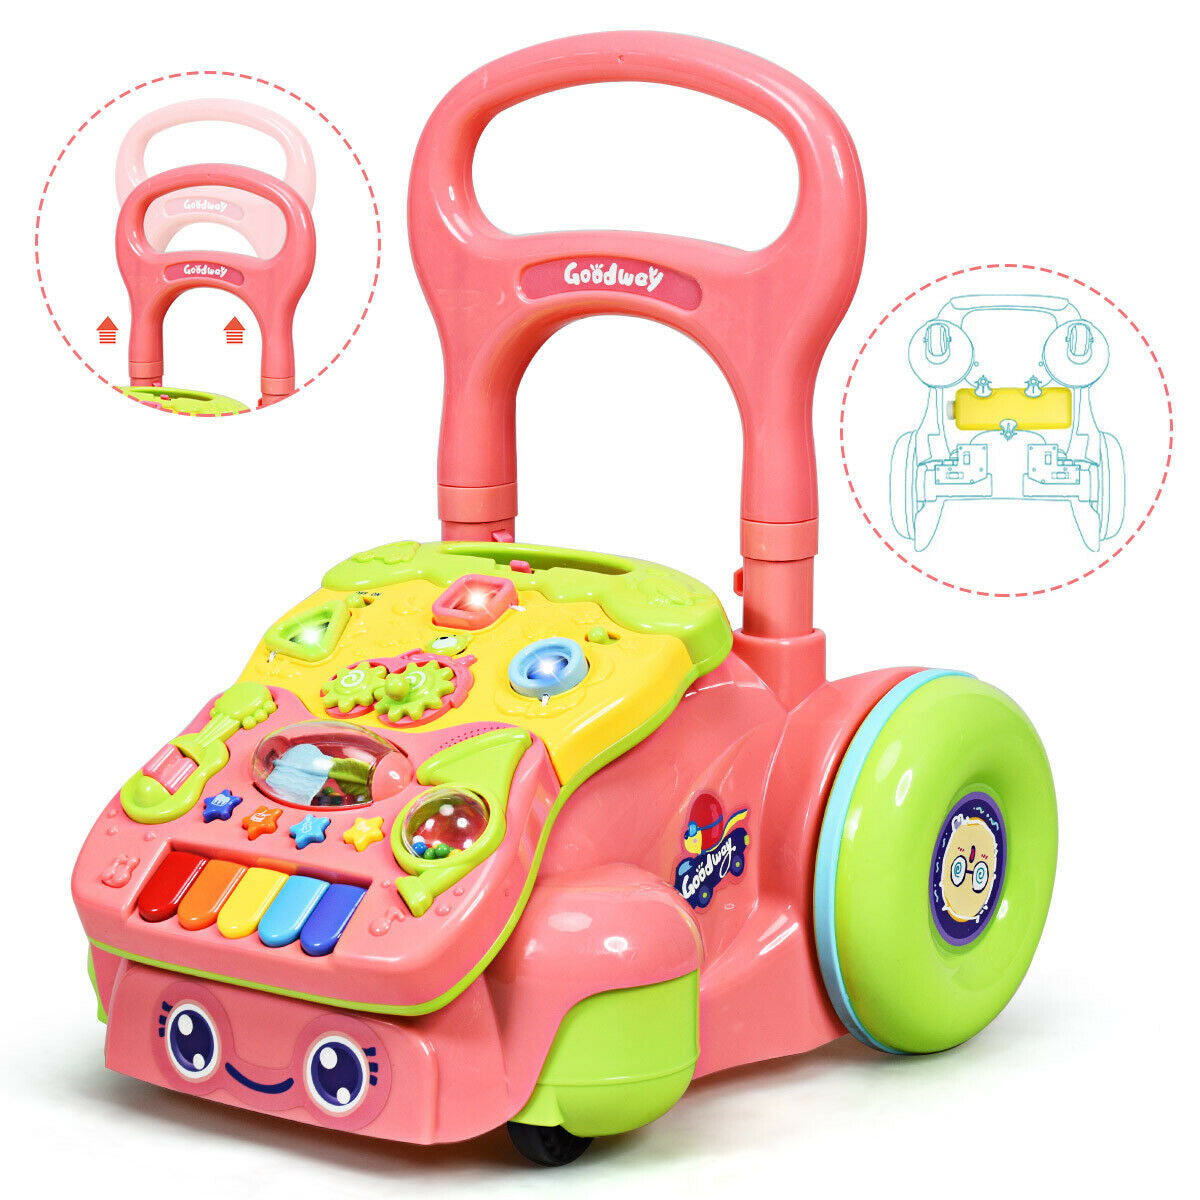 Hikidspace Sit-to-Stand Learning Baby Walker for Early Development Toys